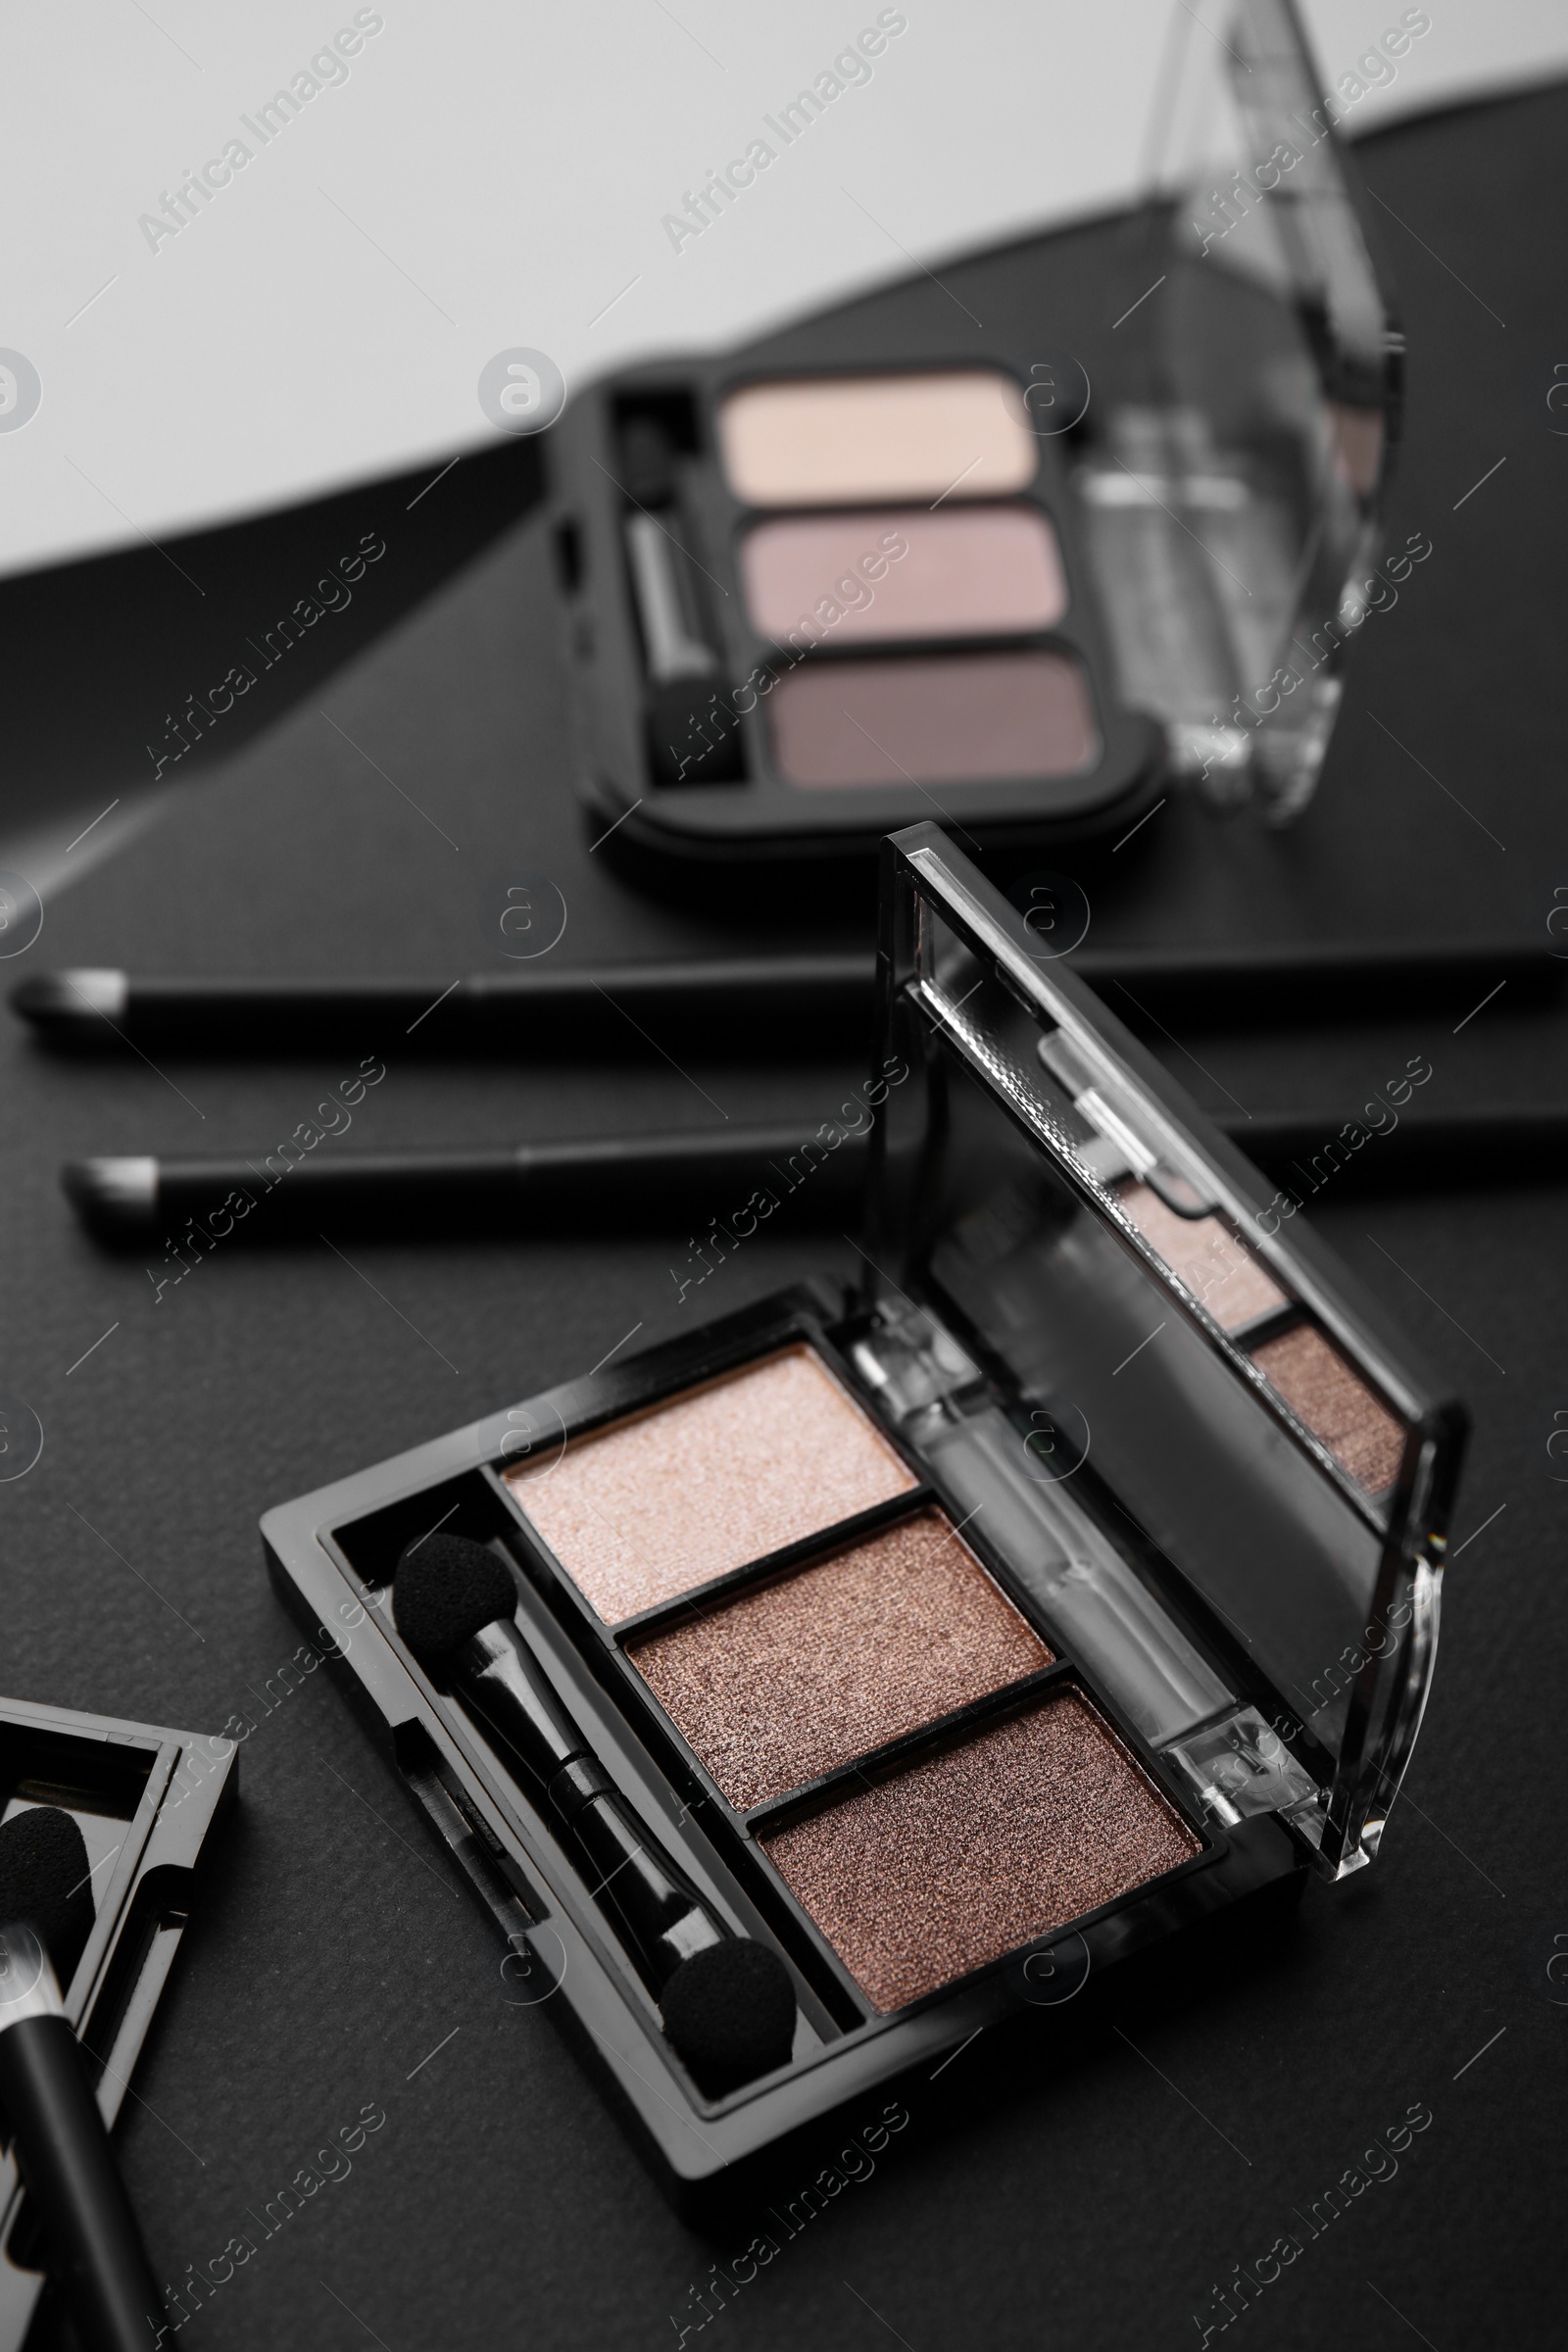 Photo of Eye shadow palettes and professional makeup brushes on black surface